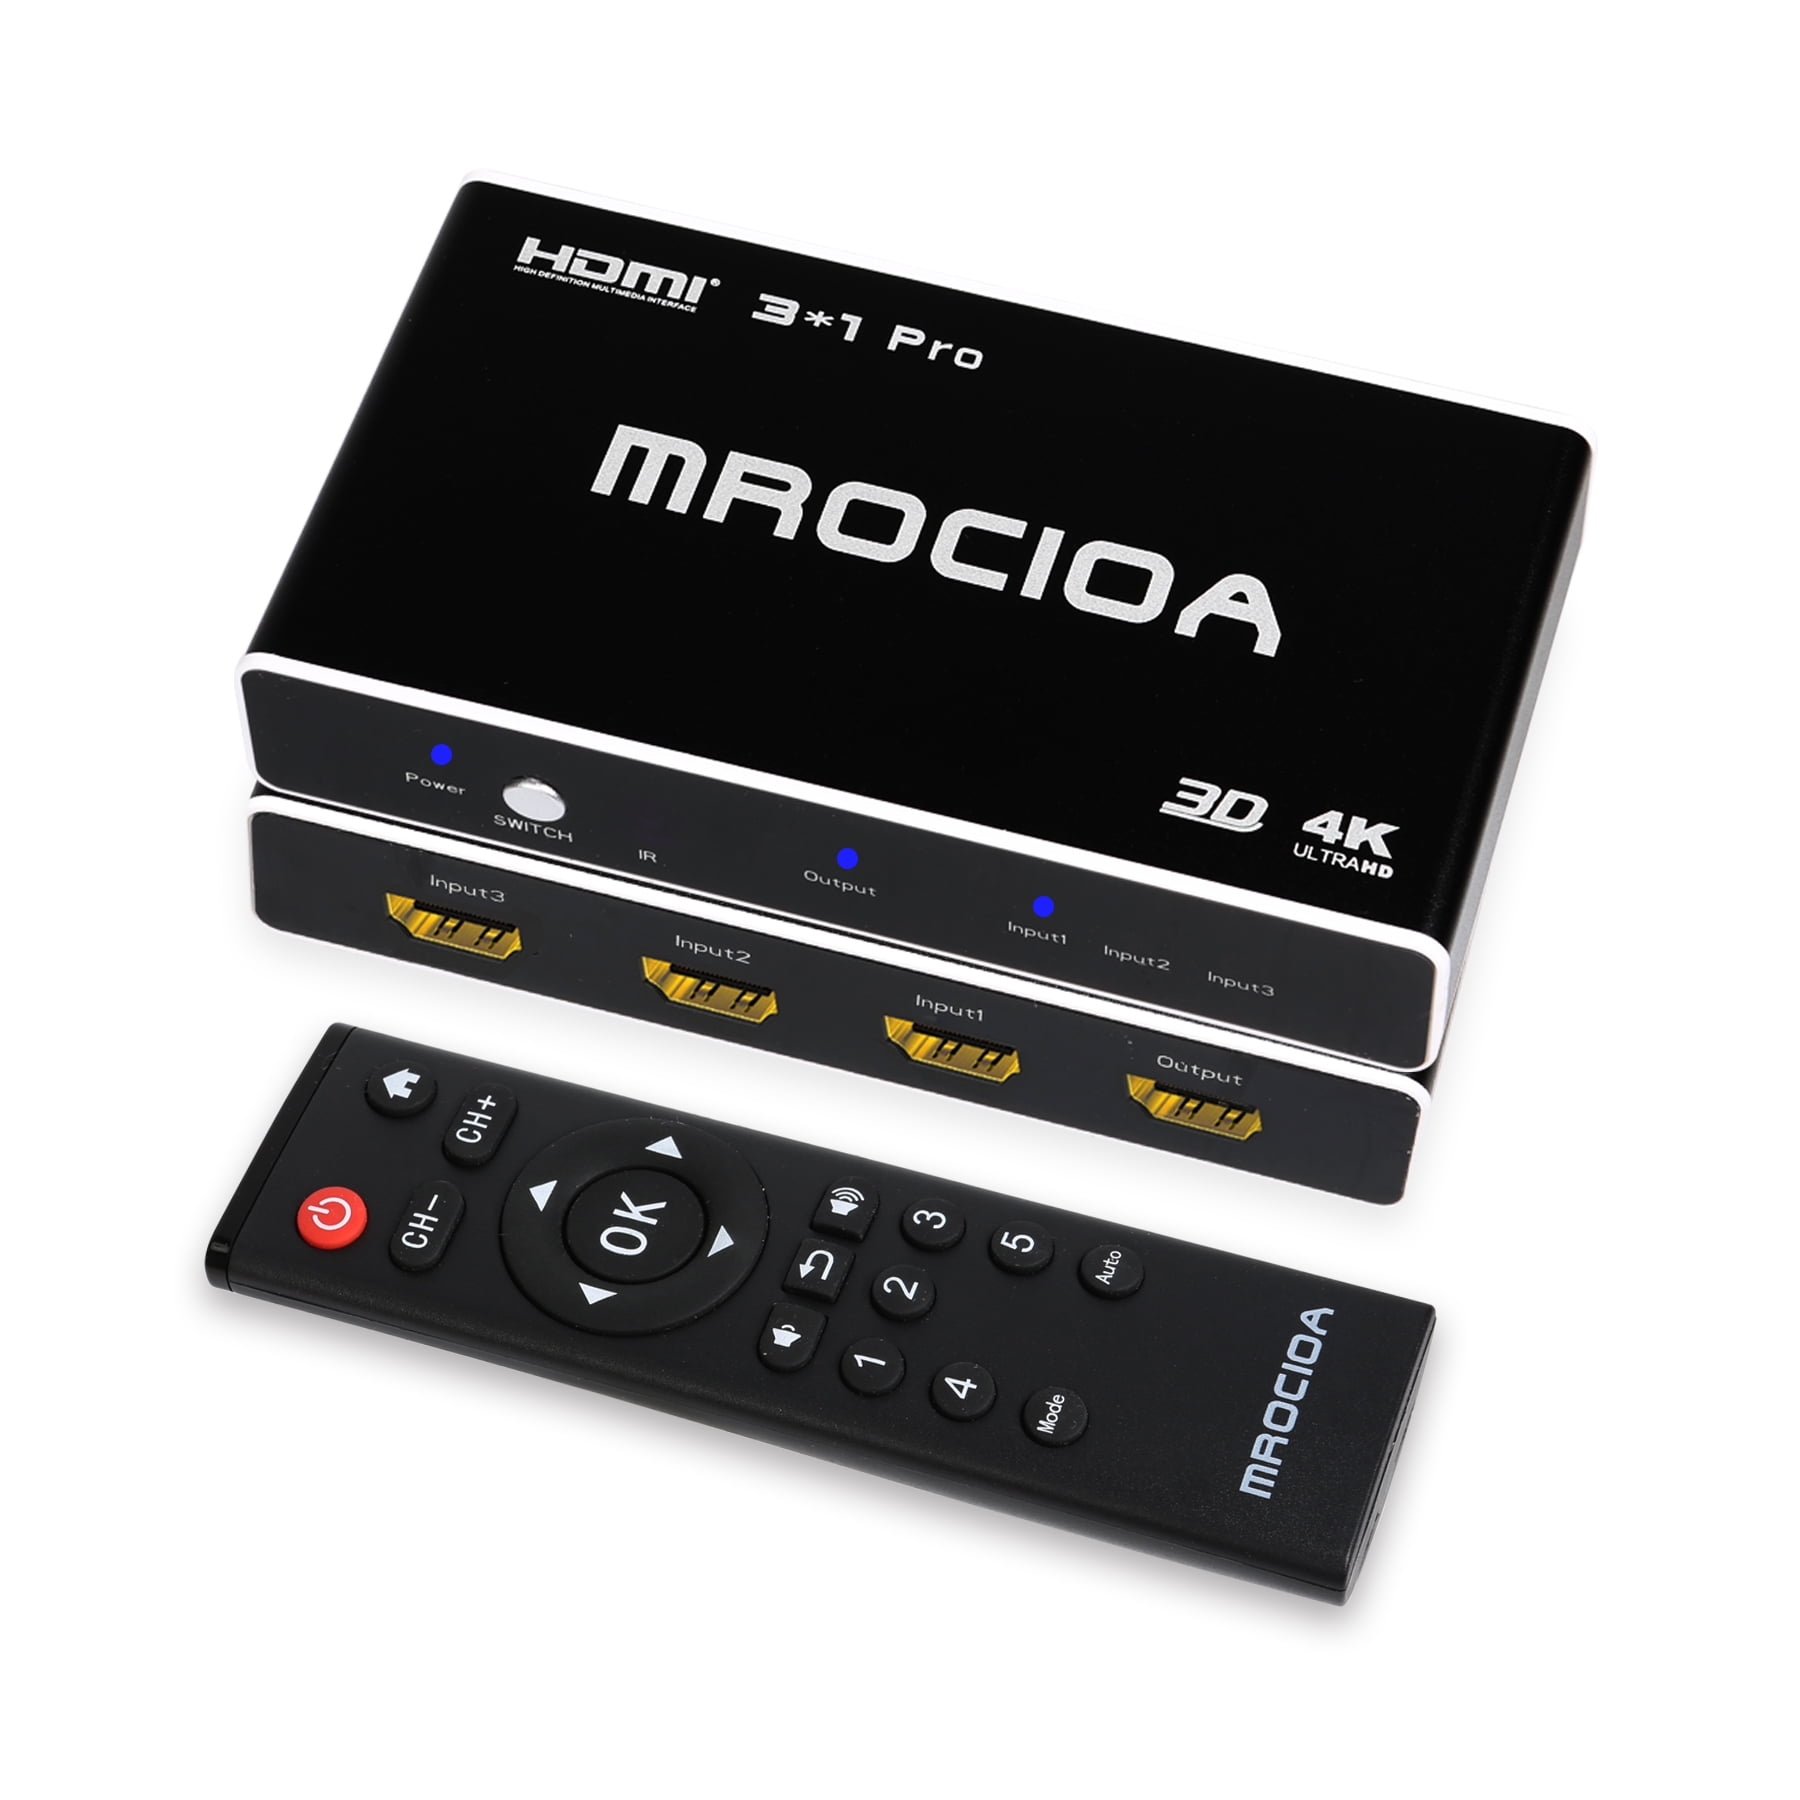 HDMI Switch Arc, 3 in 1 Out 4K@60Hz Metal HDMI Switcher Splitter, Mrocioa HDMI Splitter Box with Remote for PS5/Xbox One/OLED TV/Sky Box - Walmart.com